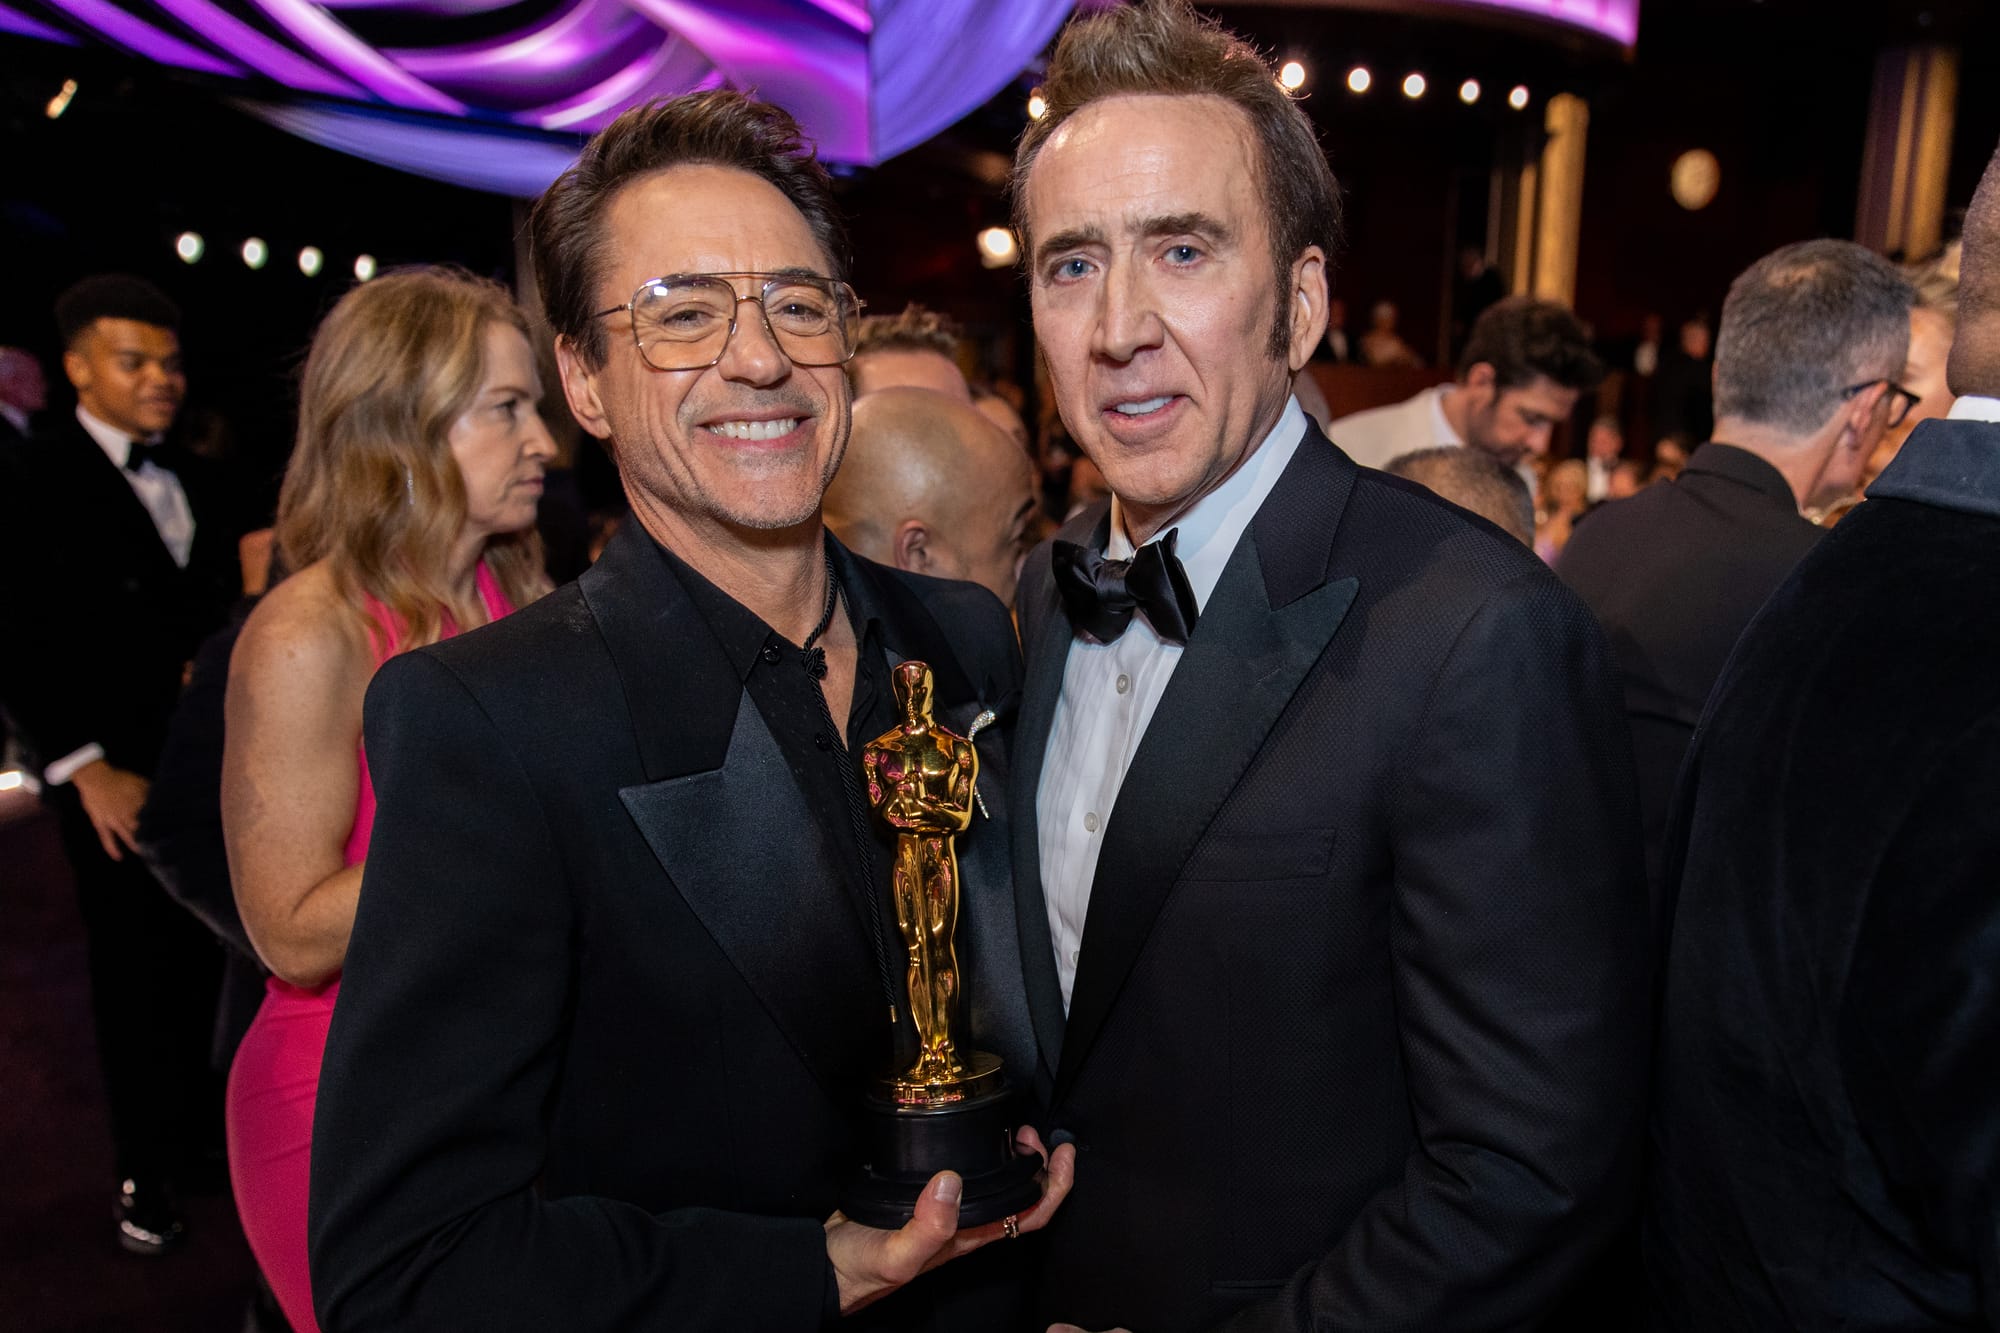 Robert Downey Jr. holds his Oscar statuette with Nicolas Cage